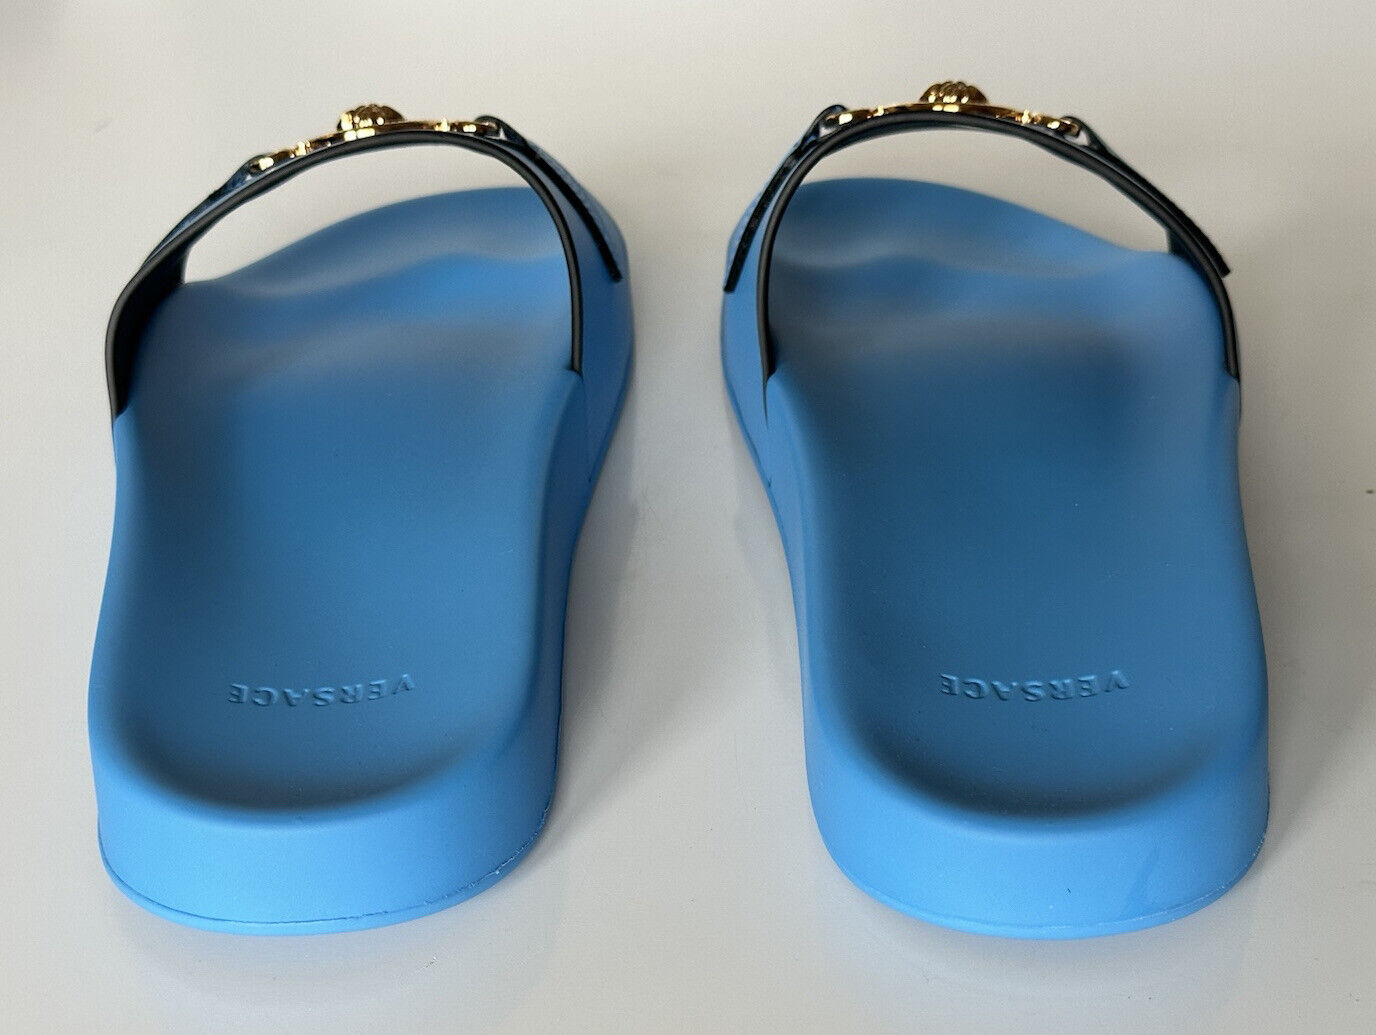 NIB $575 Versace Gold Medusa Leather/Rubber Sandals Blue 9 US (42) 1004983 Italy